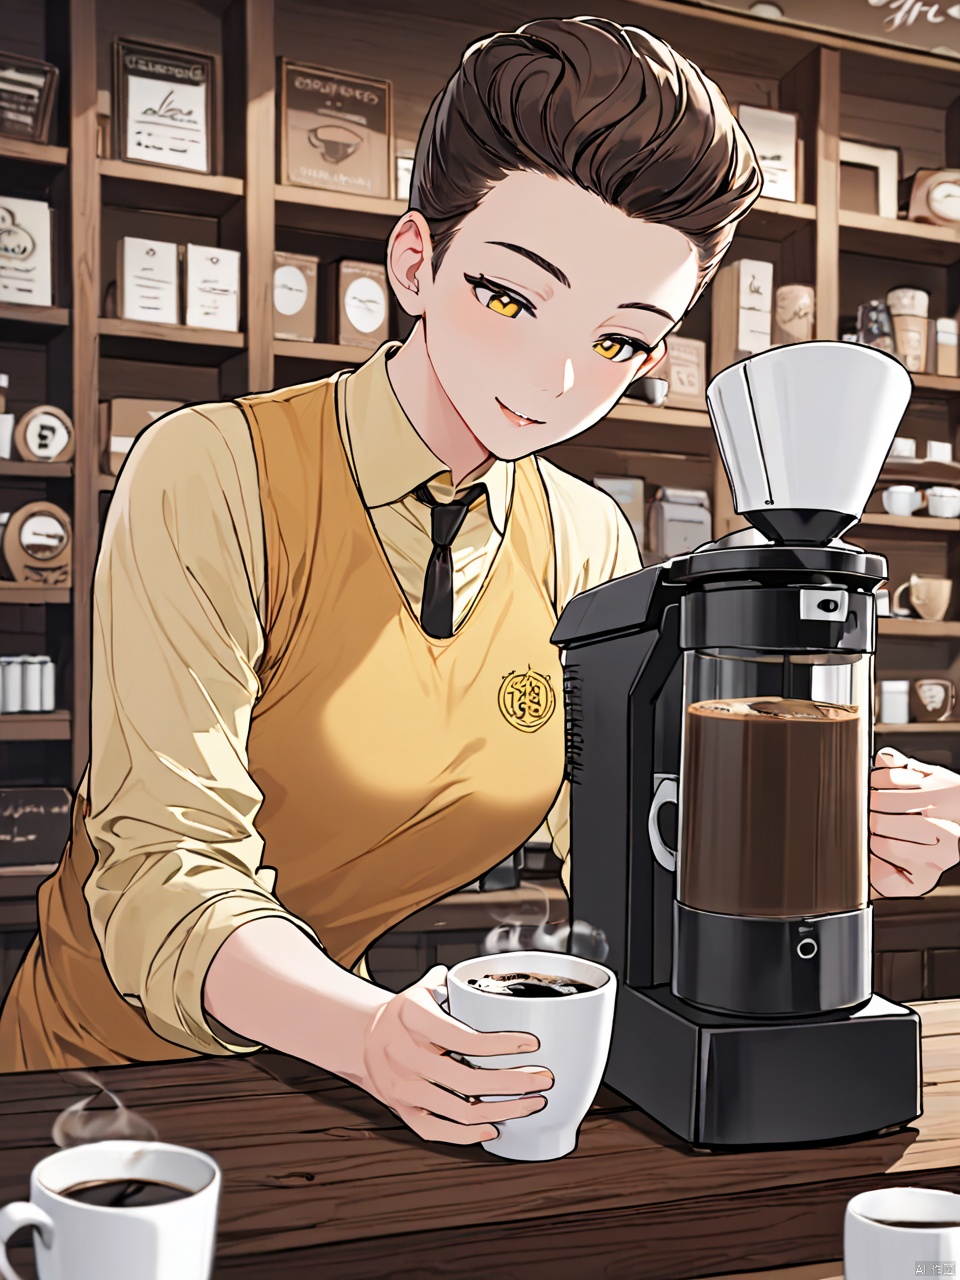 A clerk with yellow shirt in a coffee shop is making coffee